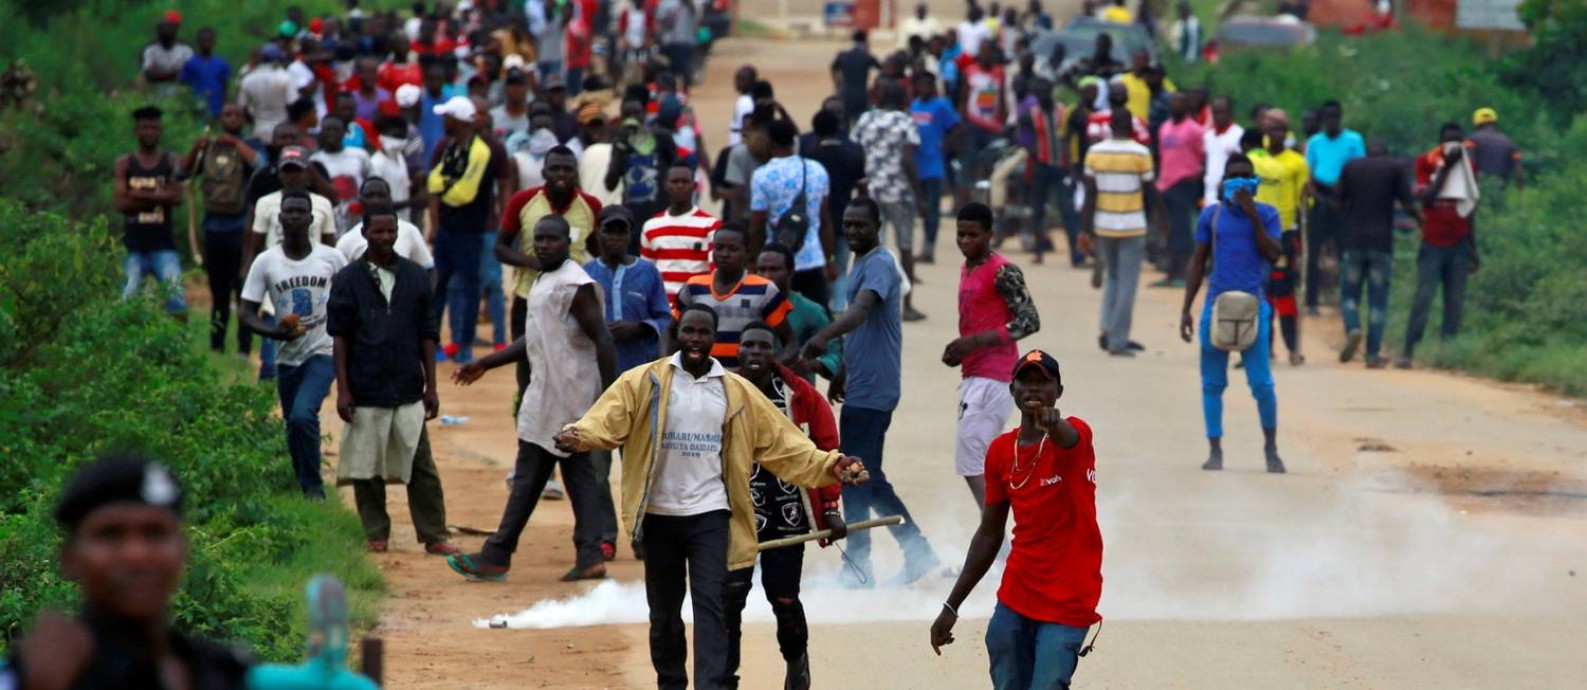 Protesters walk towards the police during a protest in Abuja, Nigeria September 4, 2019. REUTERS/Afolabi Sotunde Foto: AFOLABI SOTUNDE / REUTERS